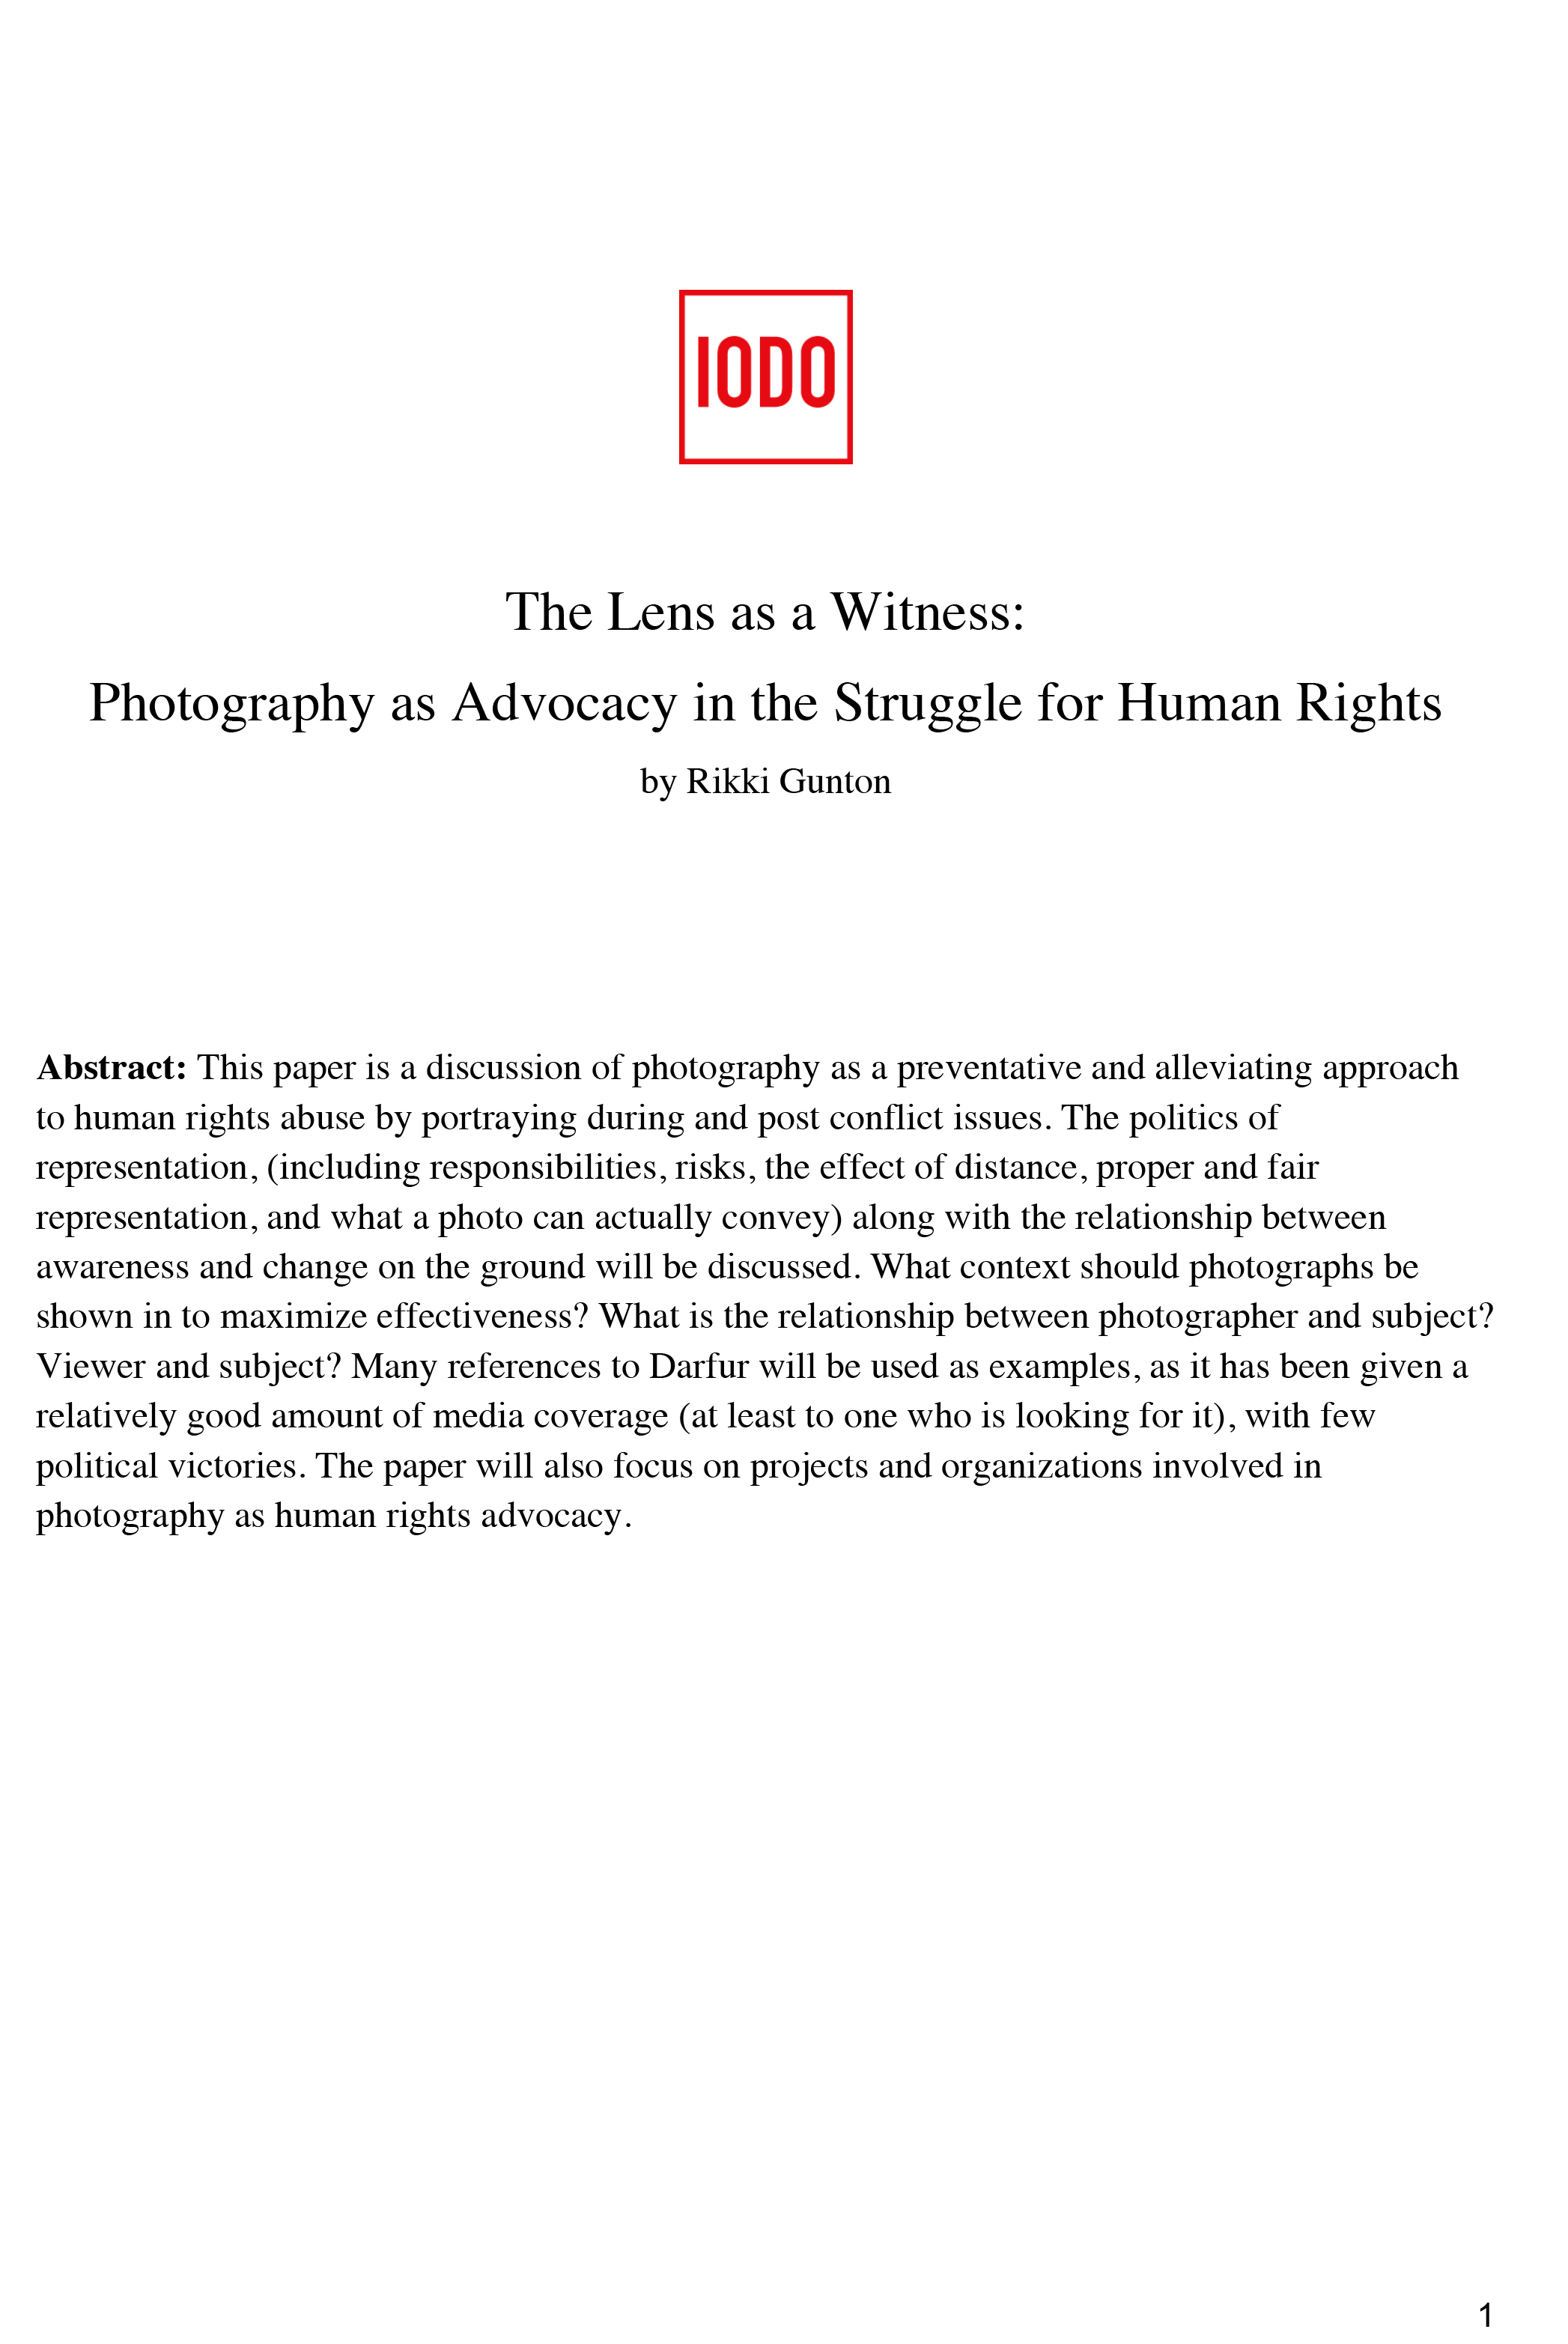 Image of "The Lens as a Witness": Photography as Advocacy in the Struggle for Human Rights